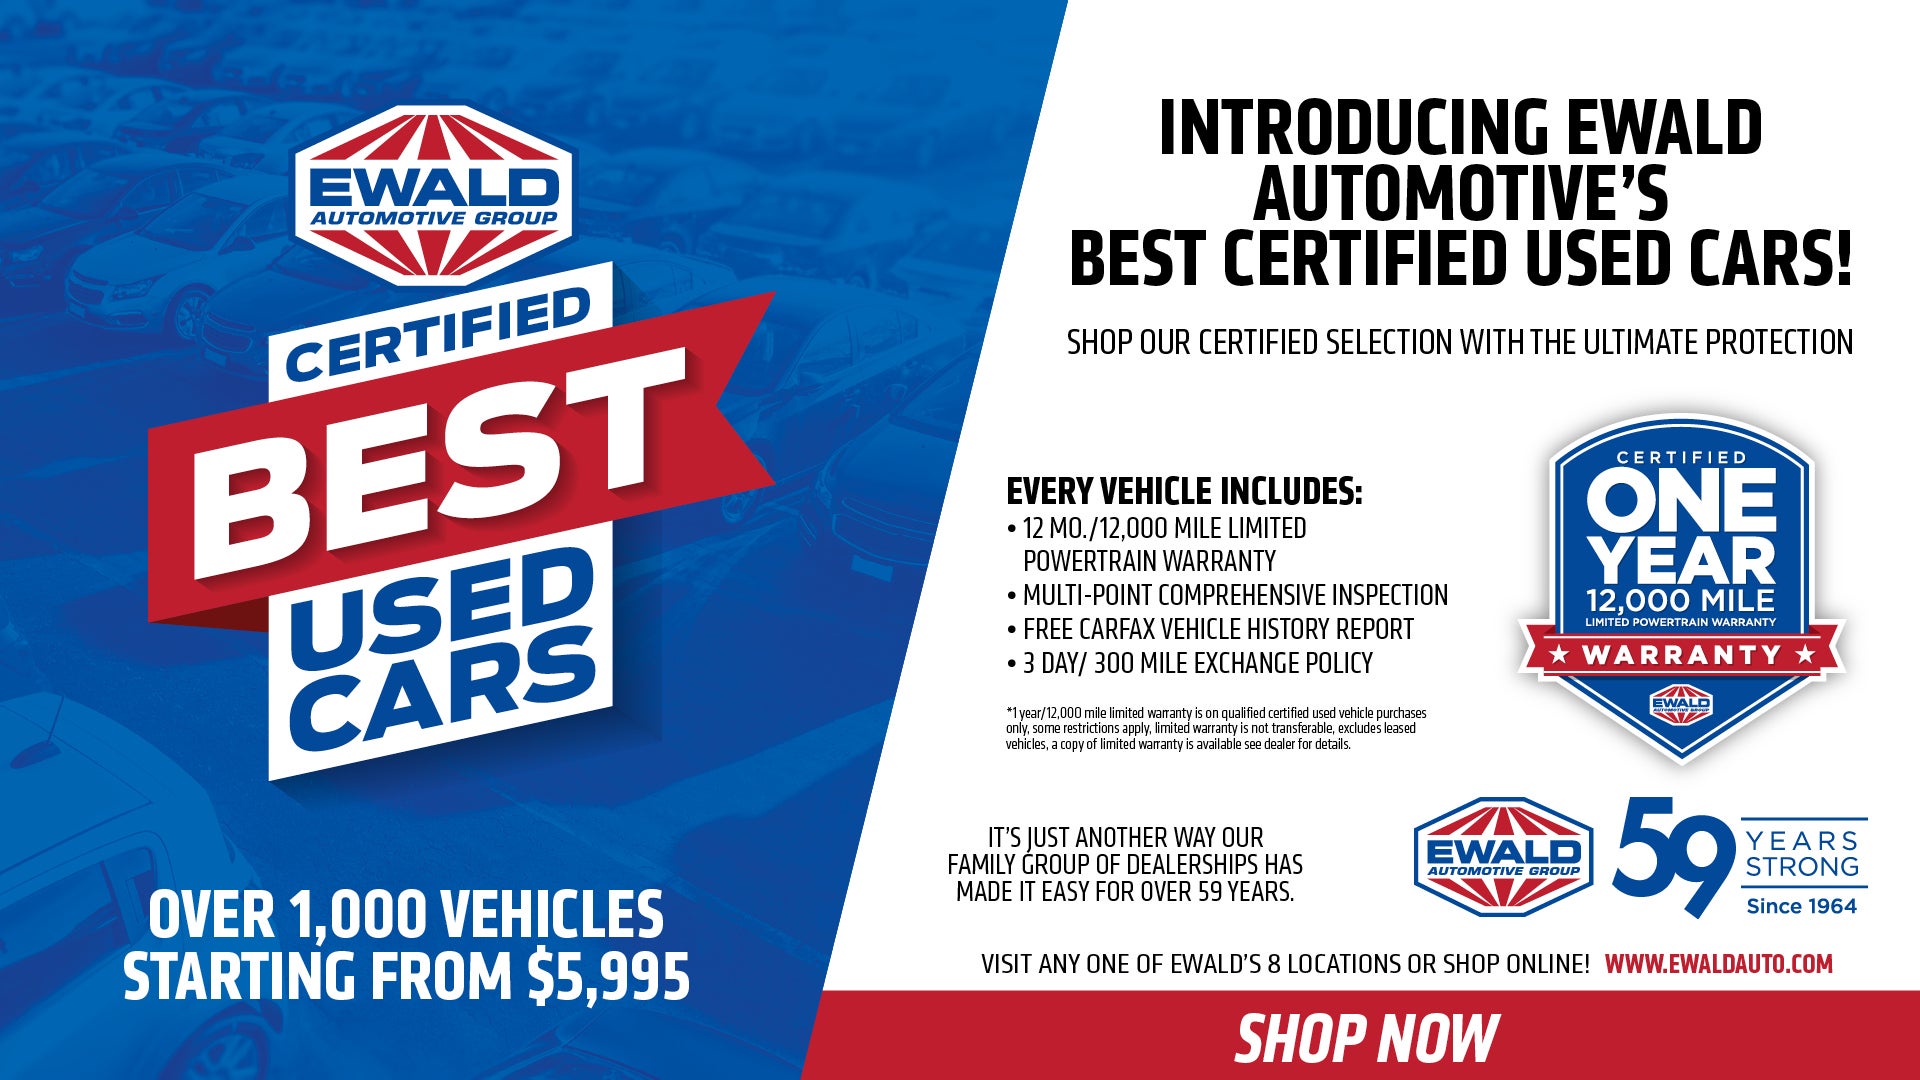 Certified Best Used Vehicles